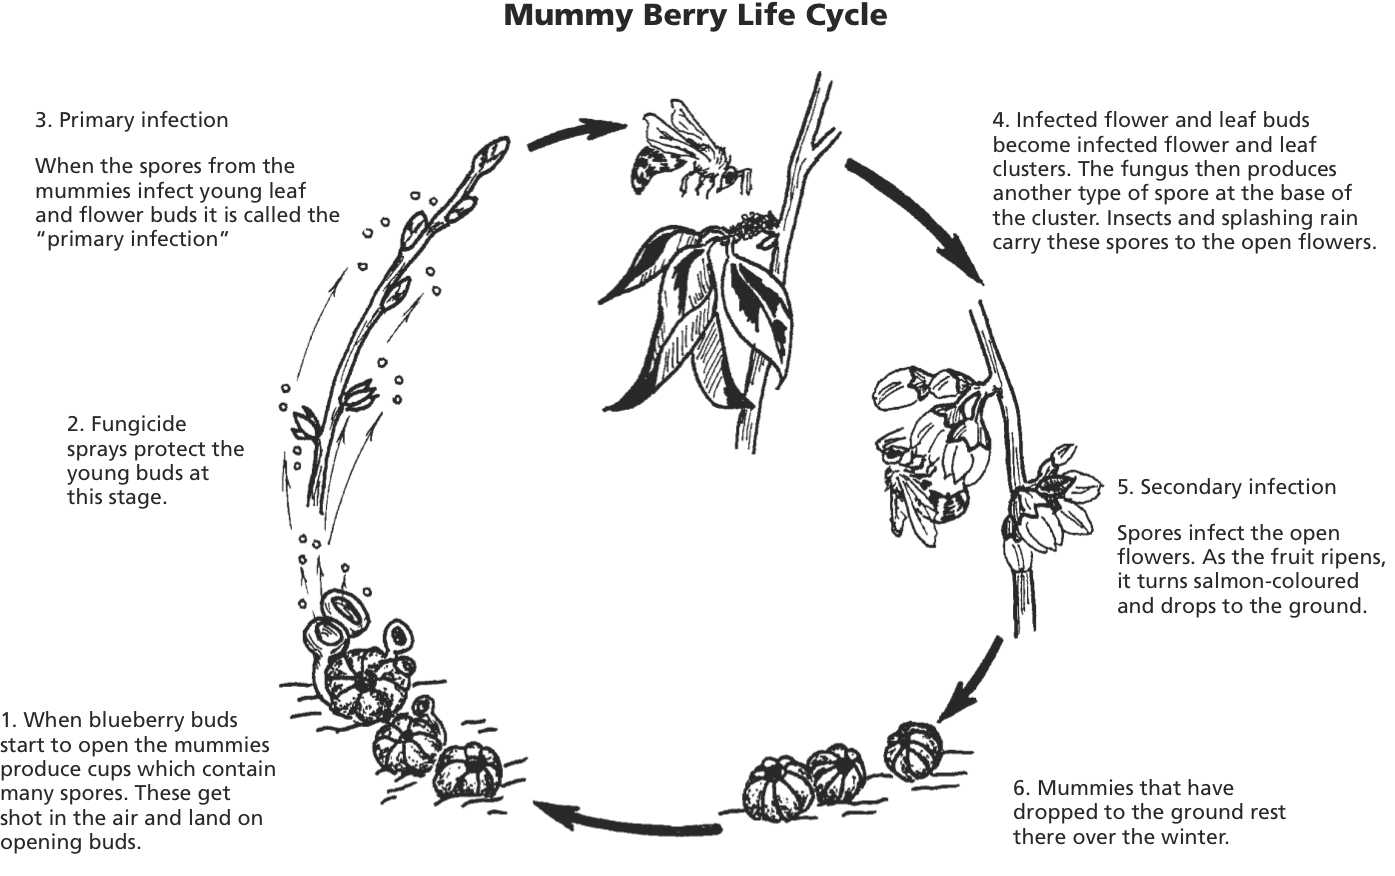 Diagram of the lifecycle of a mummy berry